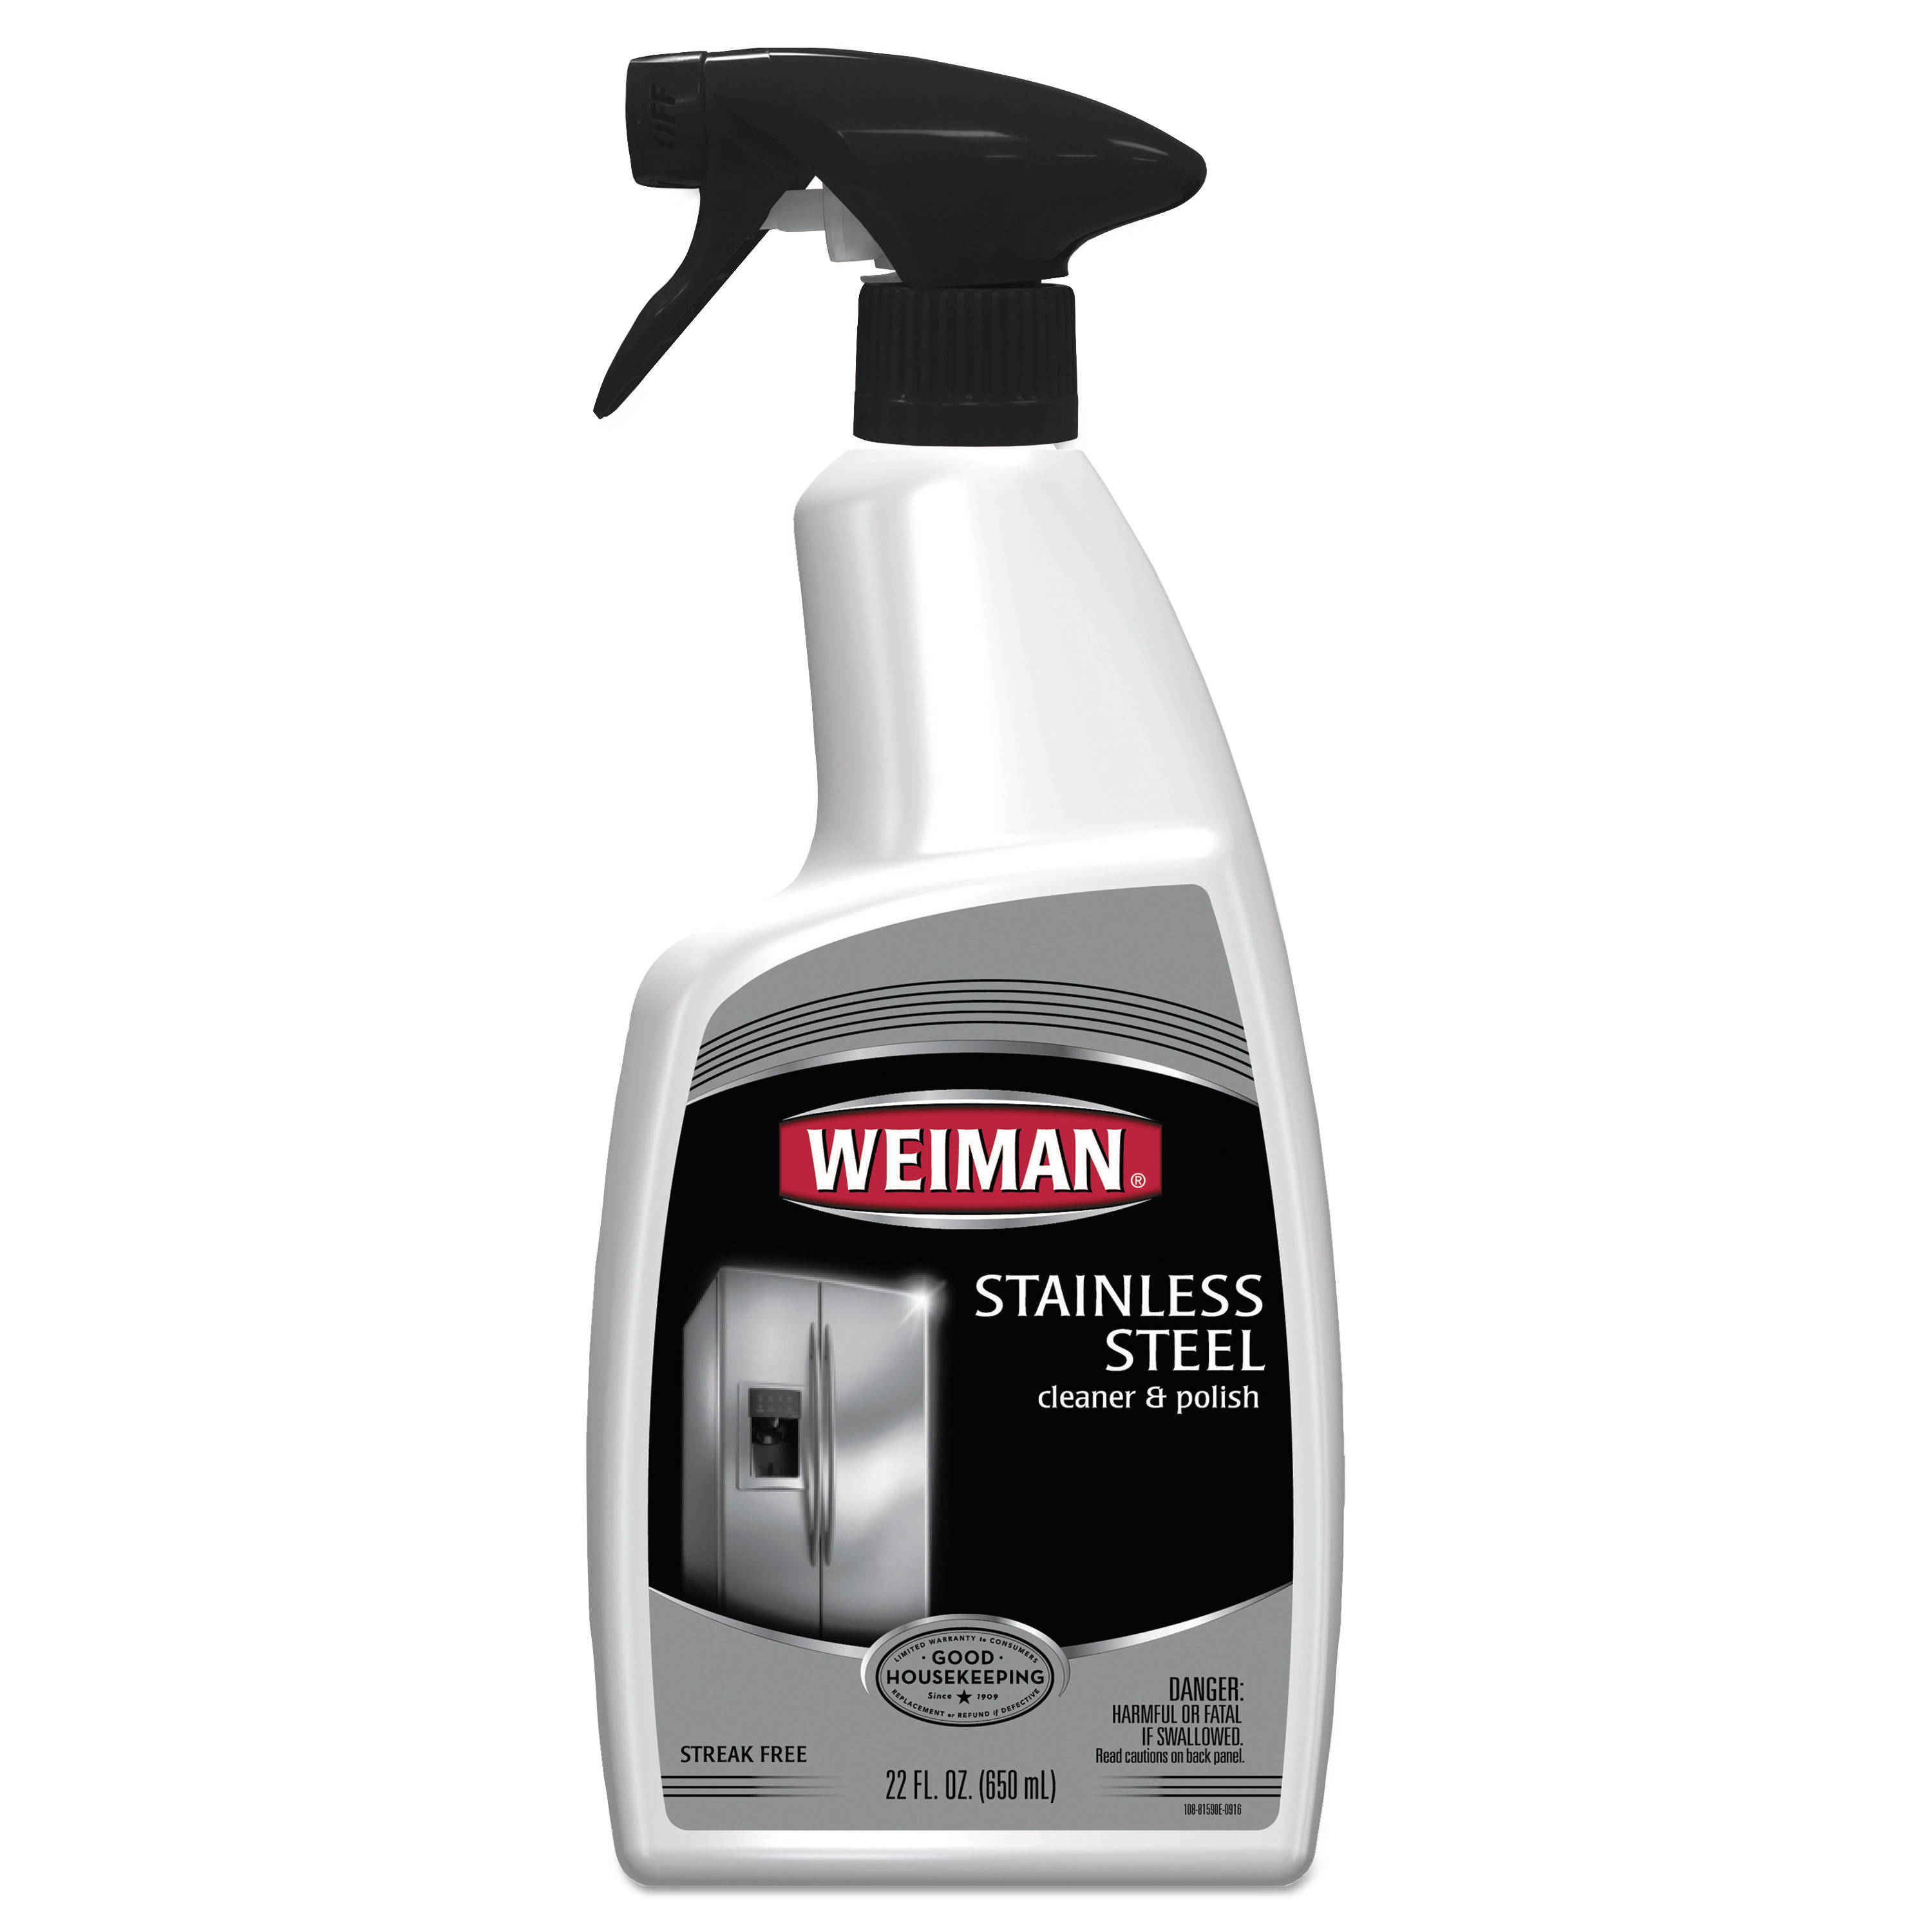  WEIMAN 108 Stainless Steel Cleaner and Polish, Floral Scent, 22 oz Spray Bottle, 6/CT (WMN108) 